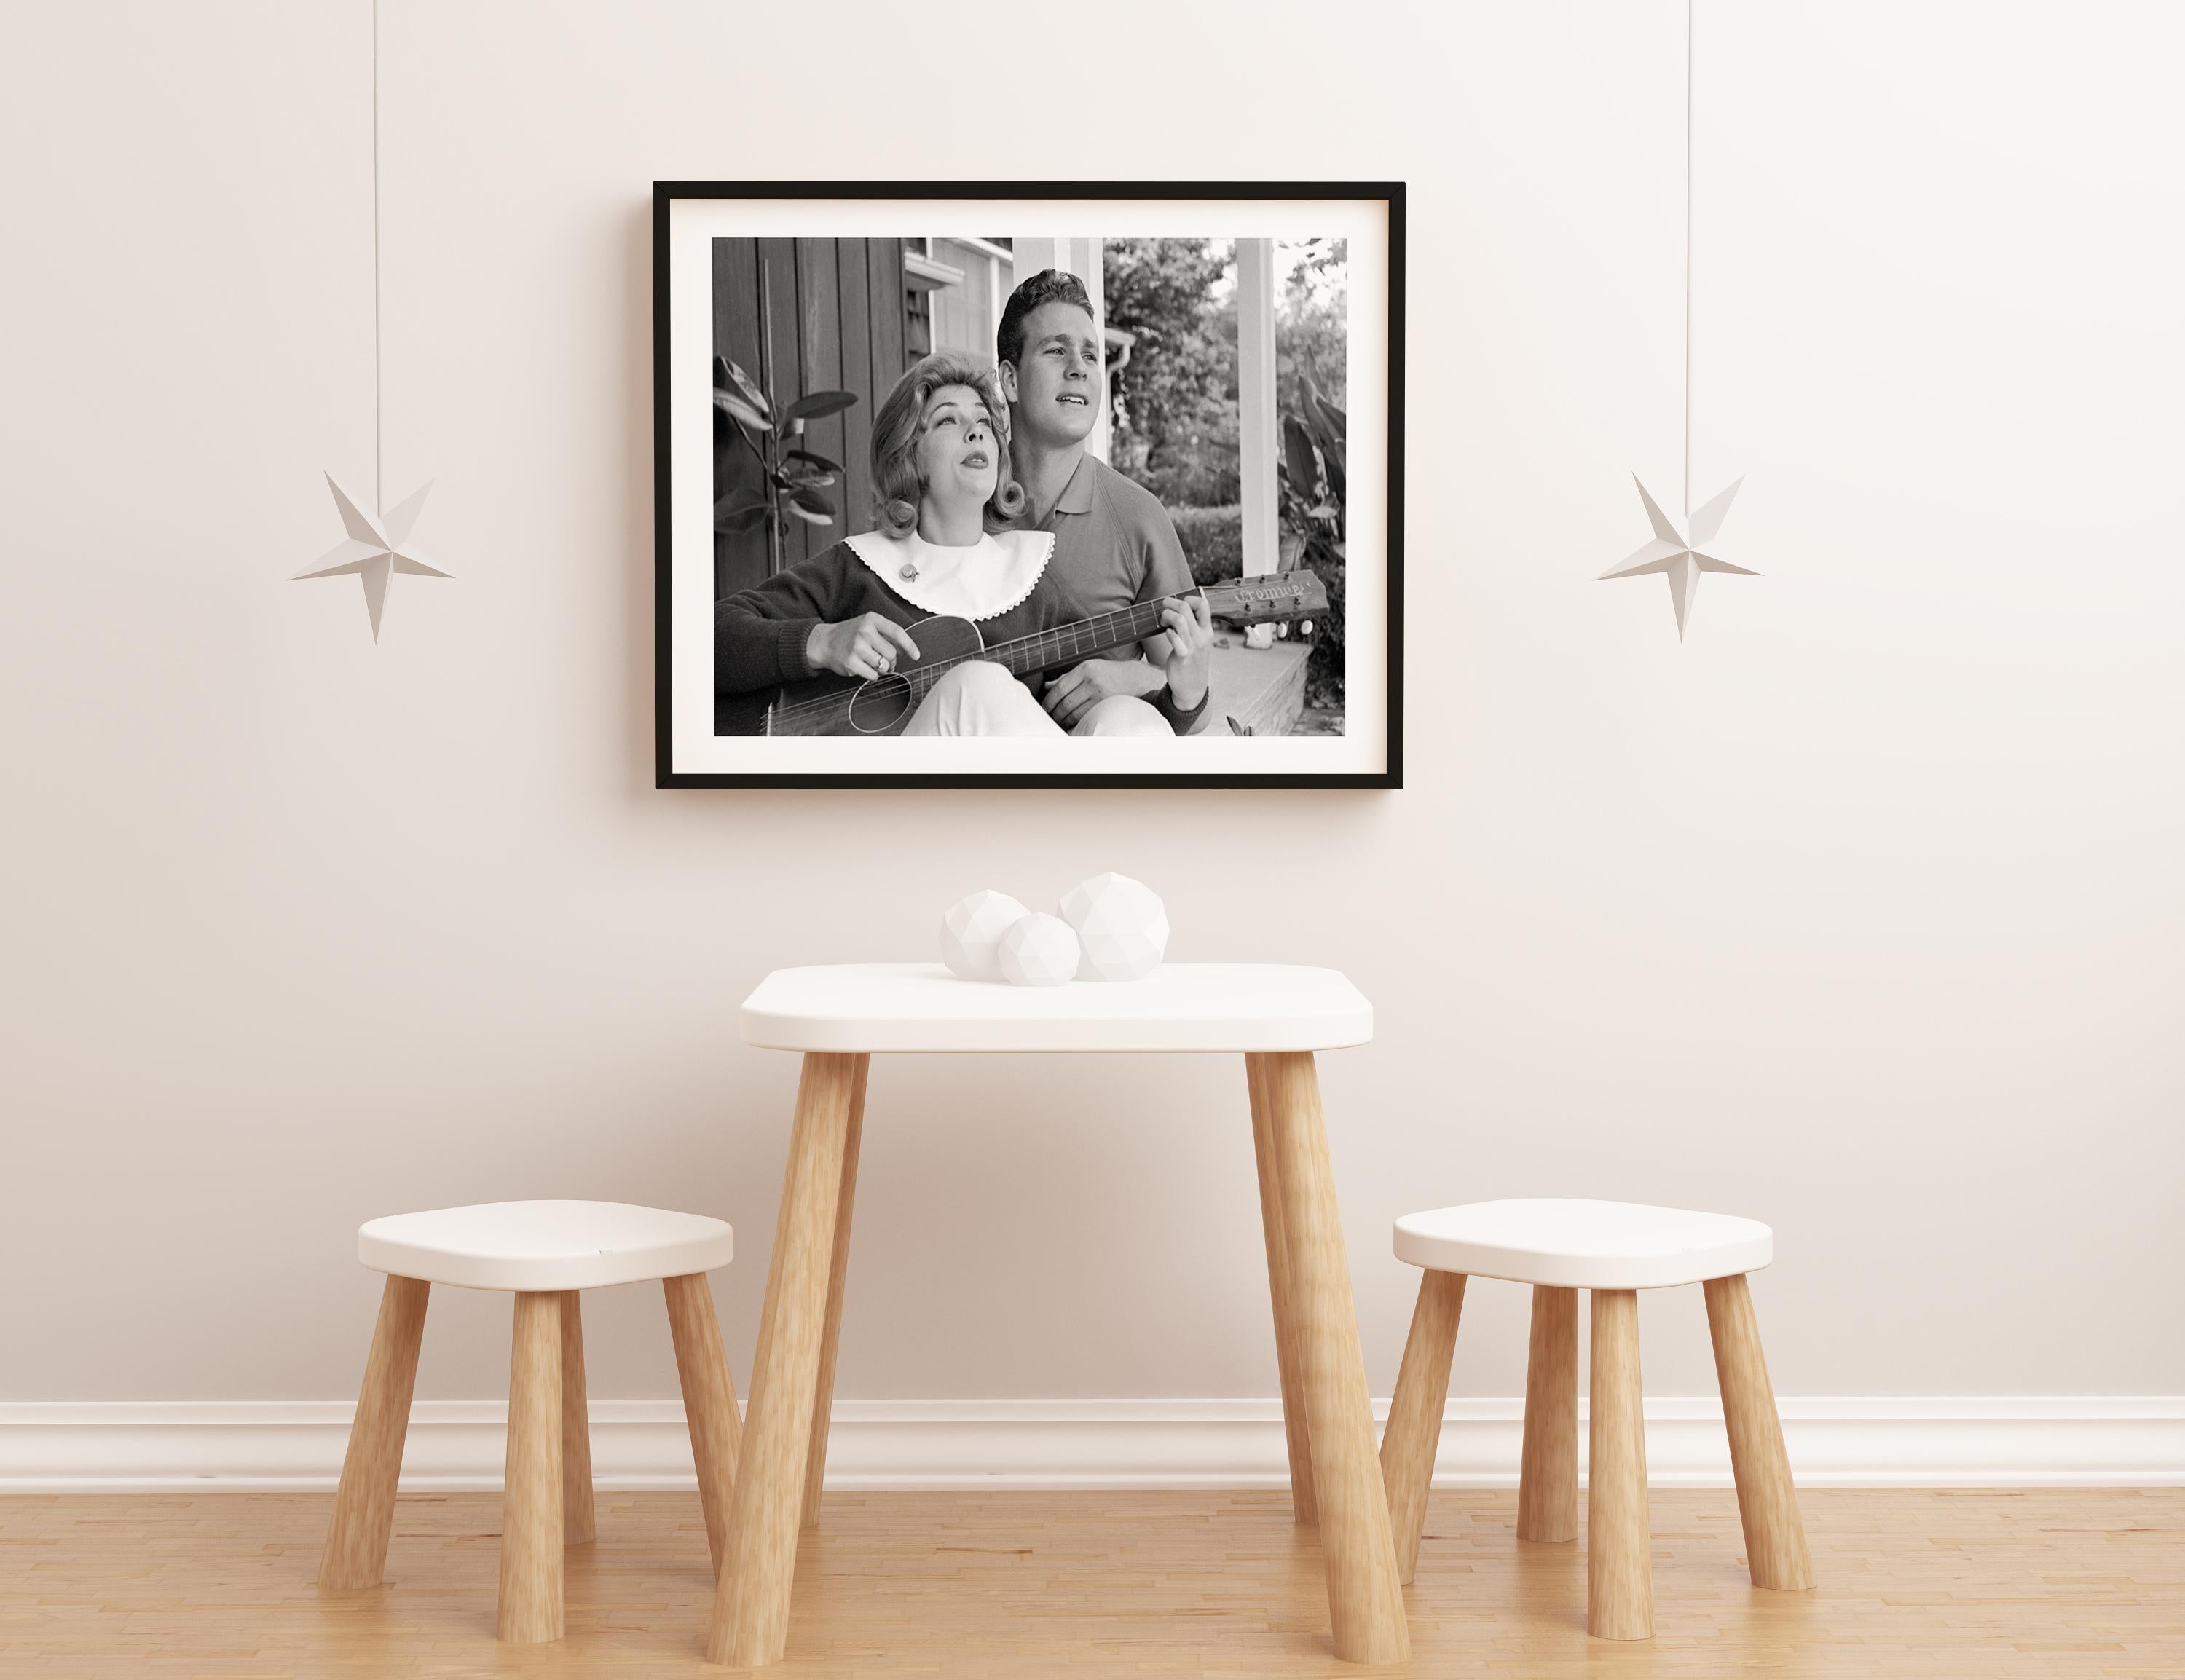 Ryan O'Neal and Joanna Moore Playing Guitar at Home Fine Art Print - Gray Portrait Photograph by Bill Kobrin